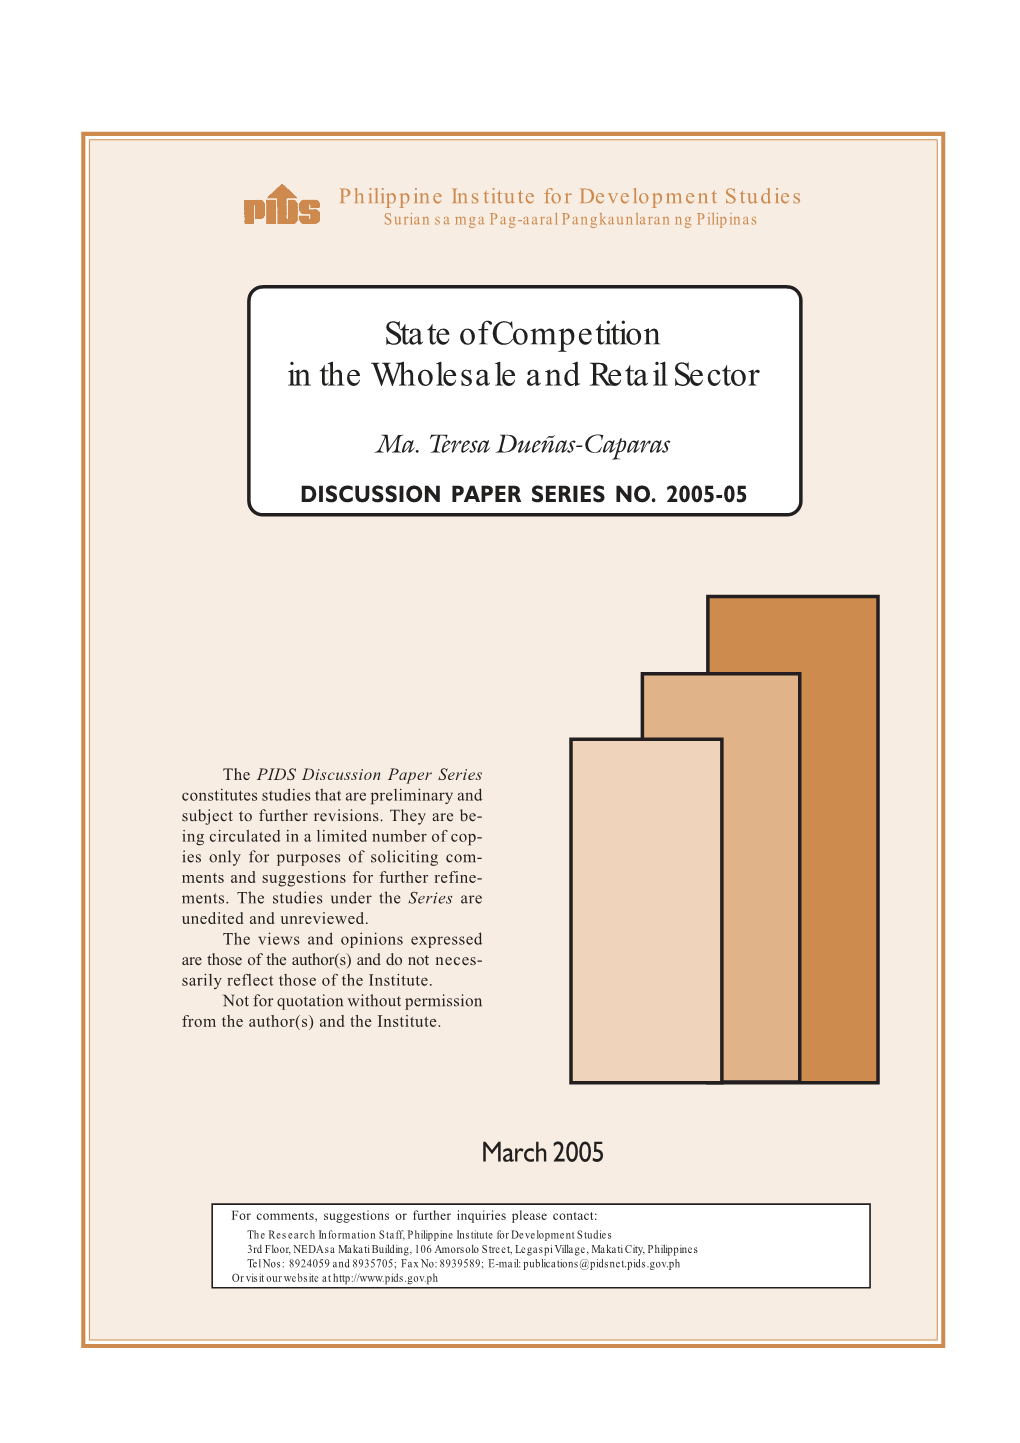 State of Competition in the Wholesale and Retail Sector